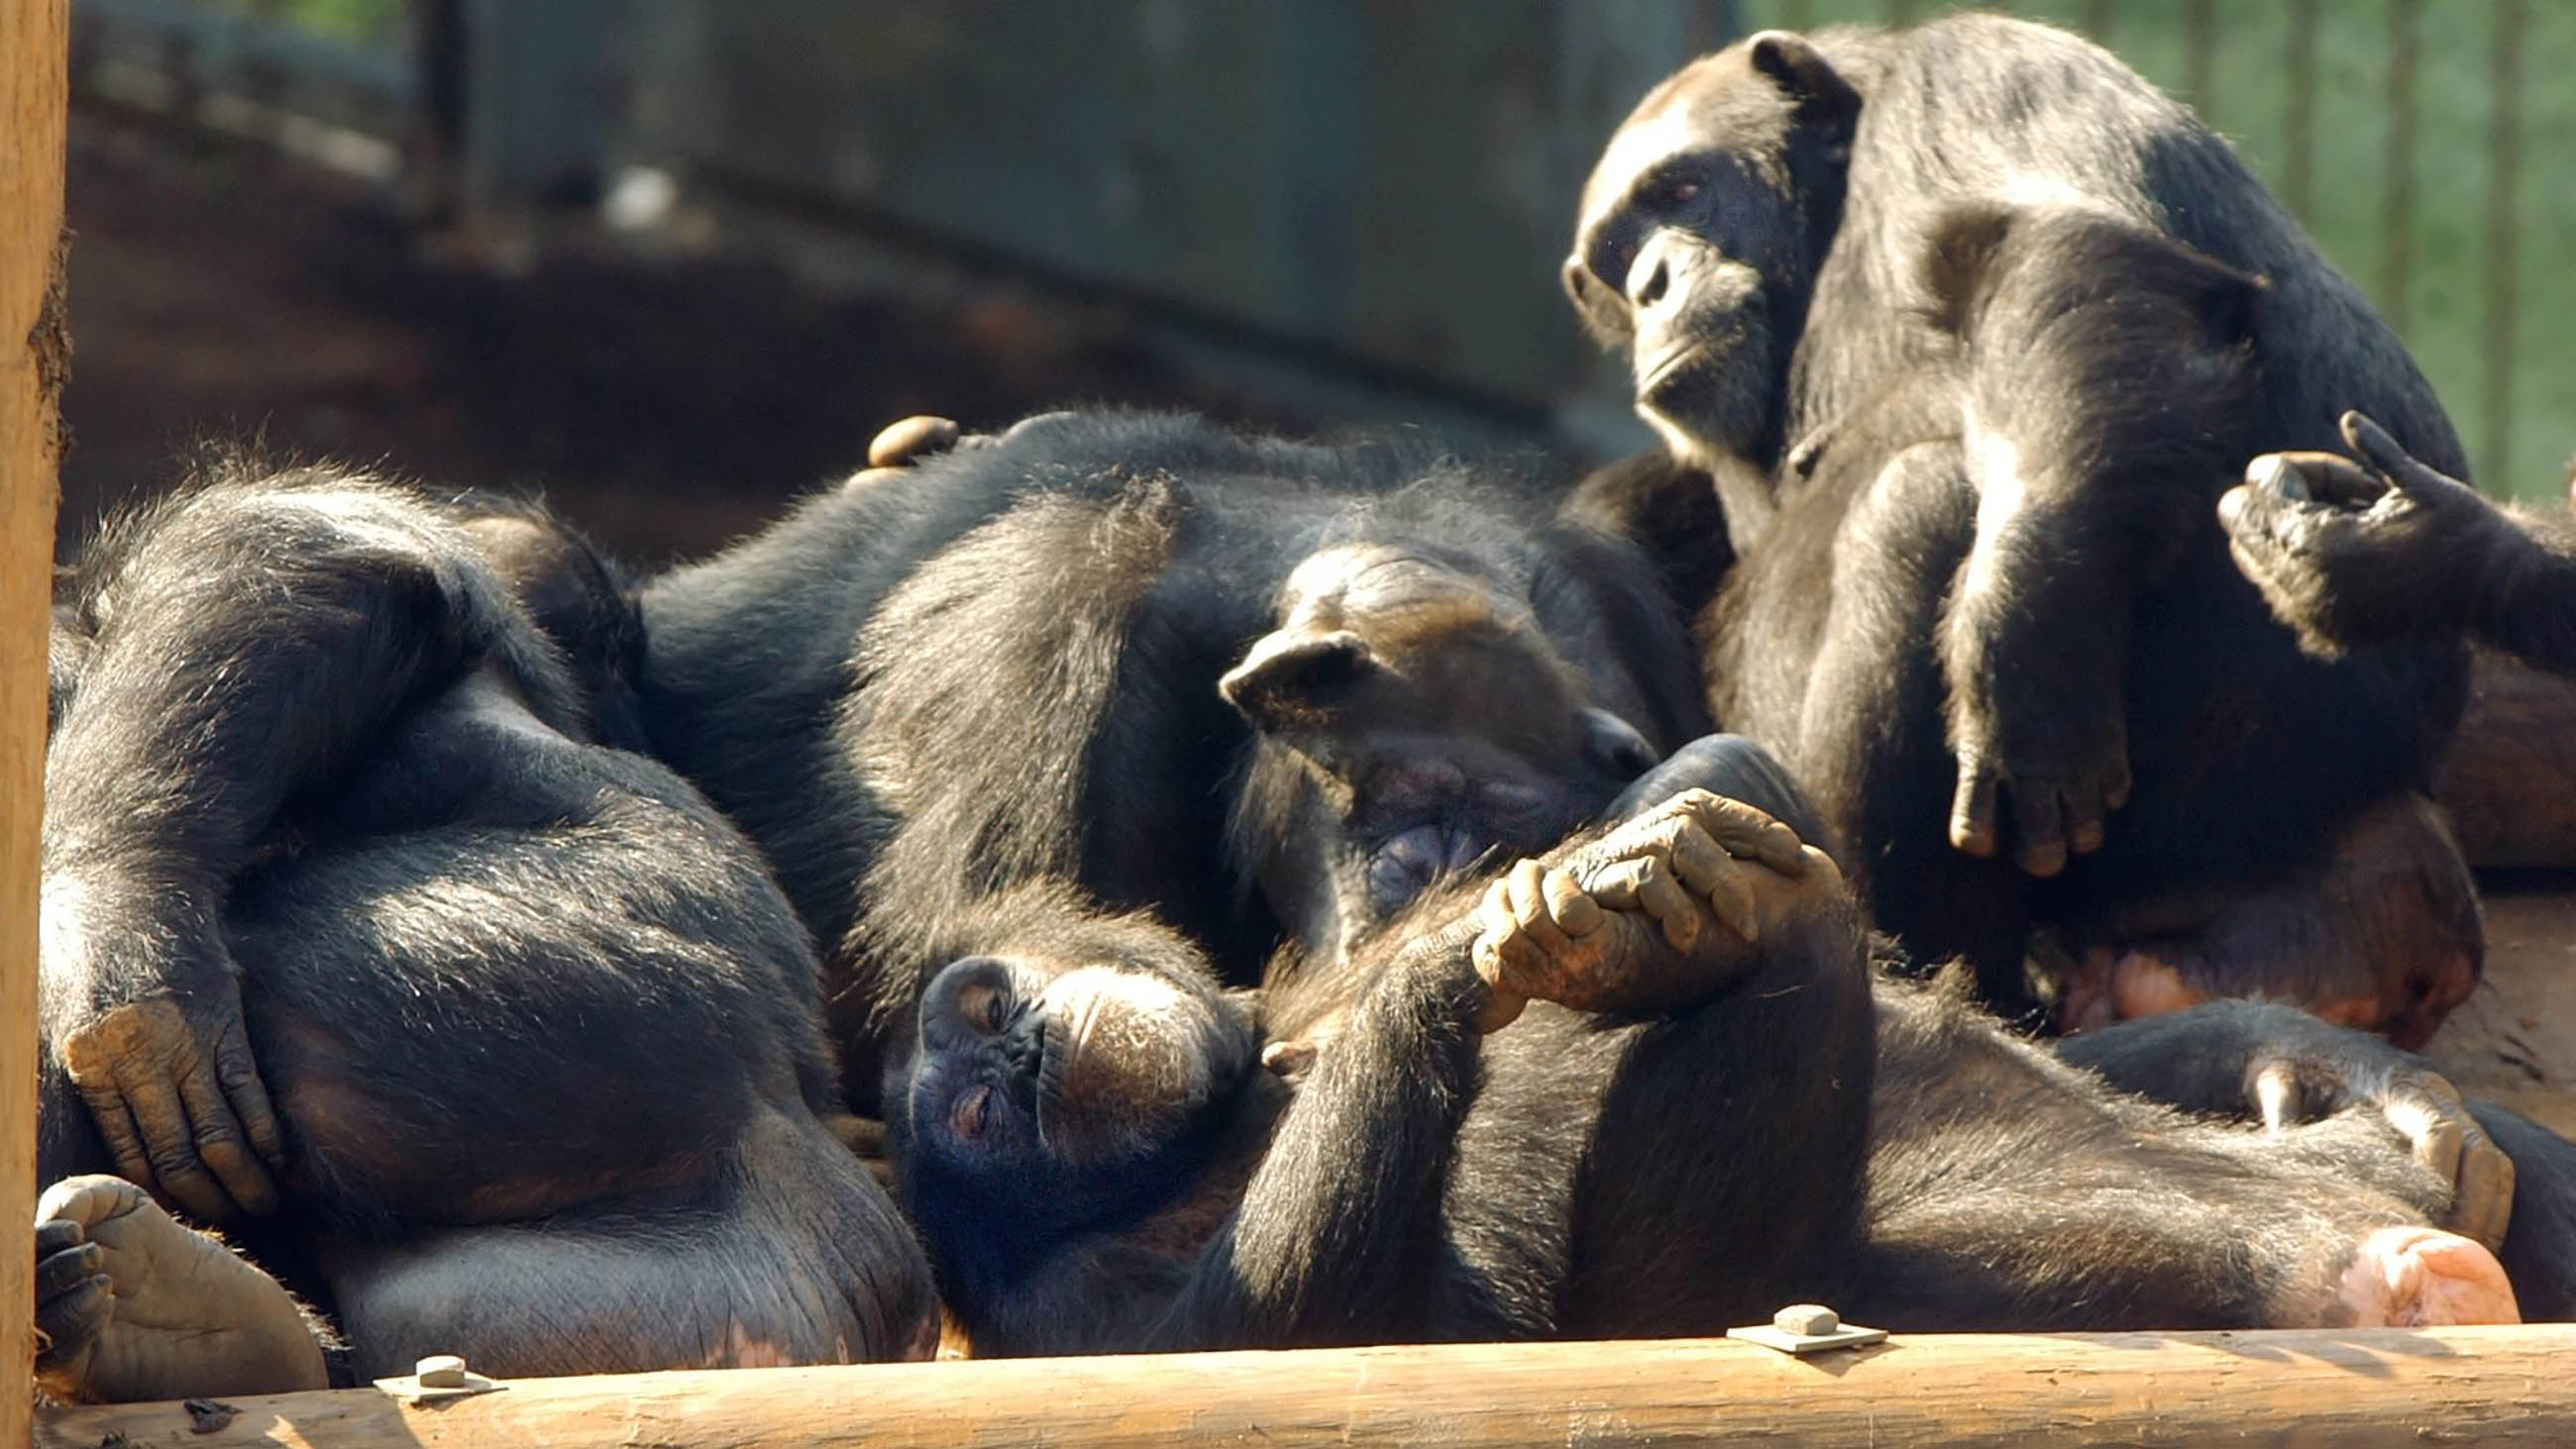 A recent study suggests that it’s not anatomy that precludes other primates from speaking, but rather brain wiring.